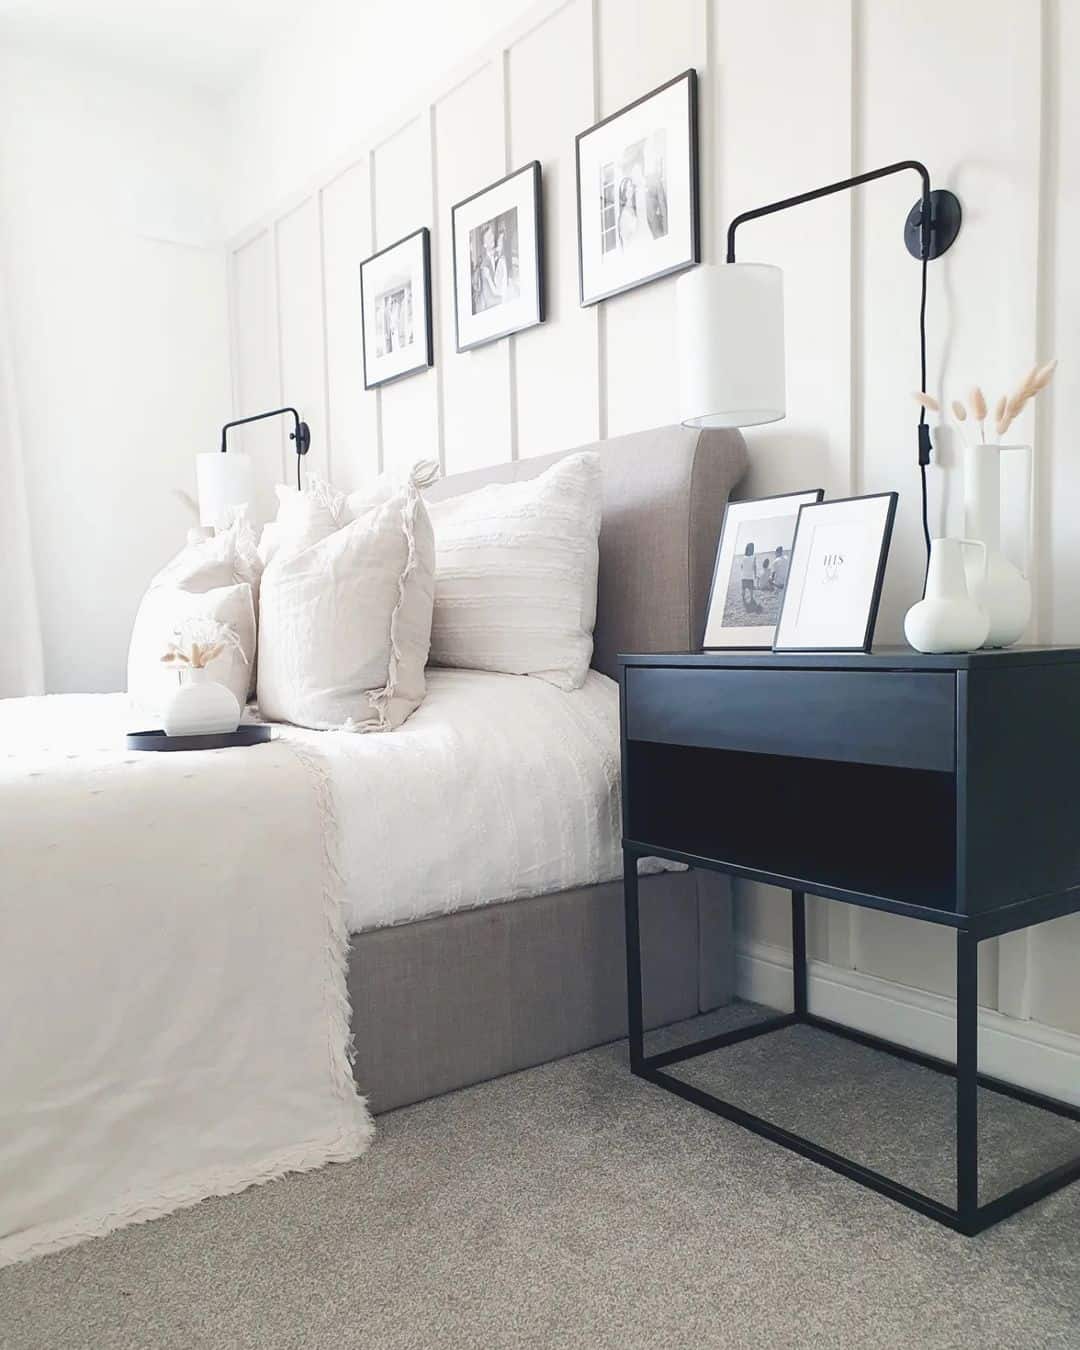 Contrasting Nightstand Ideas for a Bright White Bedroom - Soul & Lane